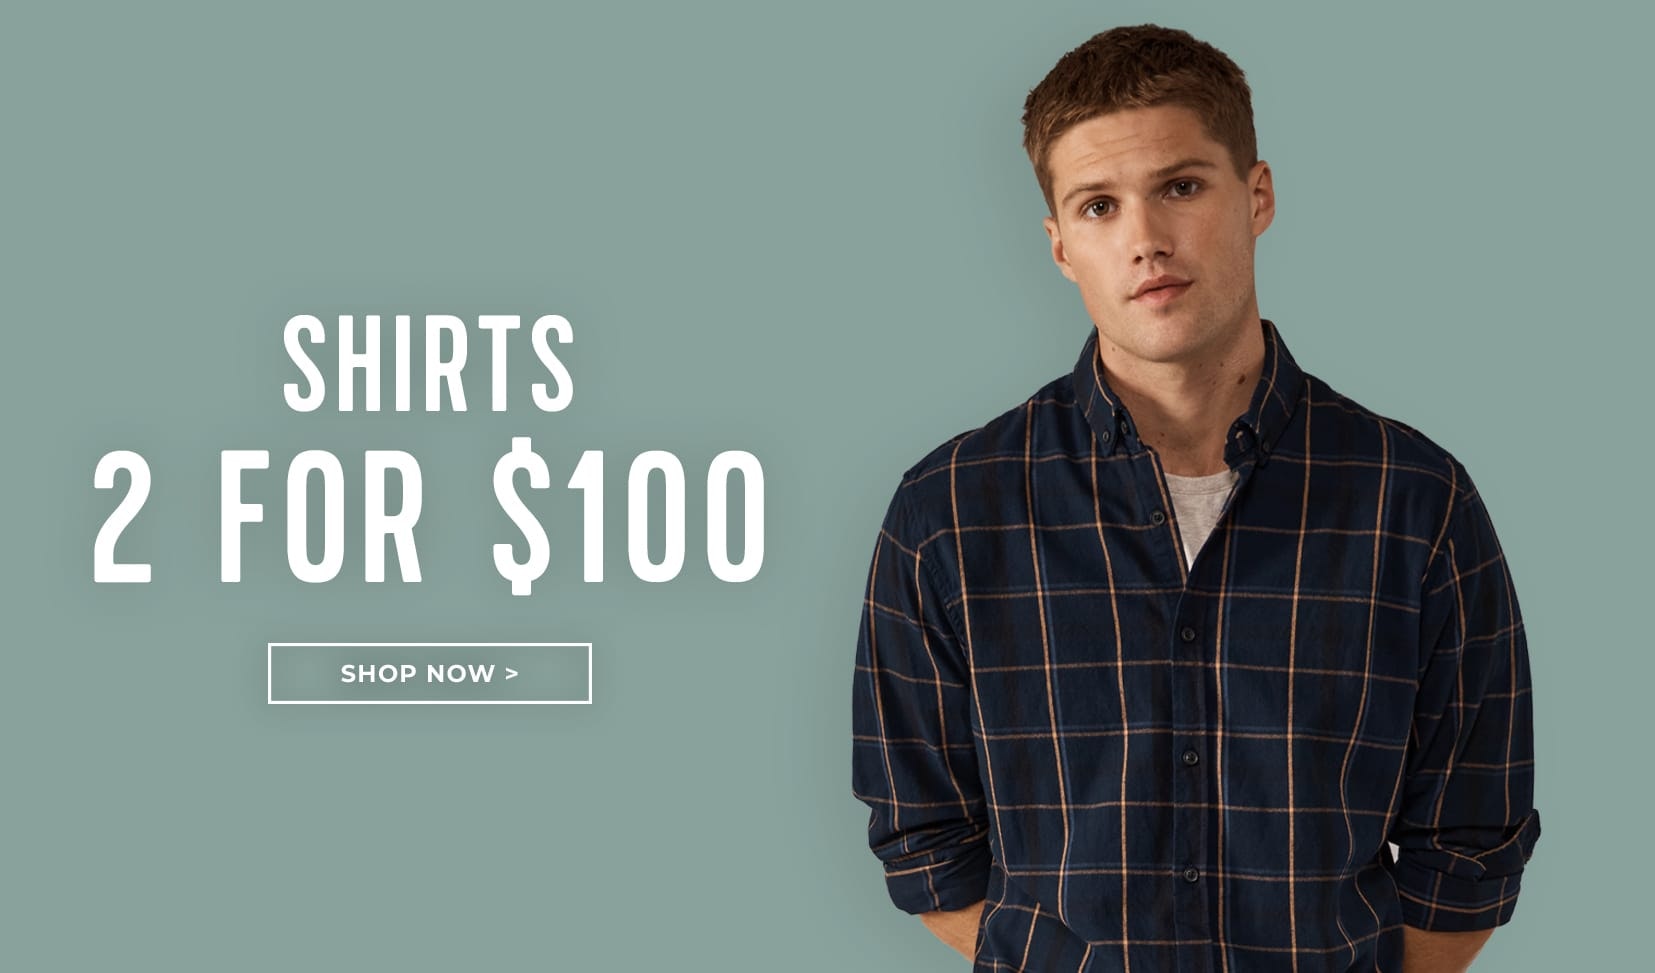 2 for 100 shirts